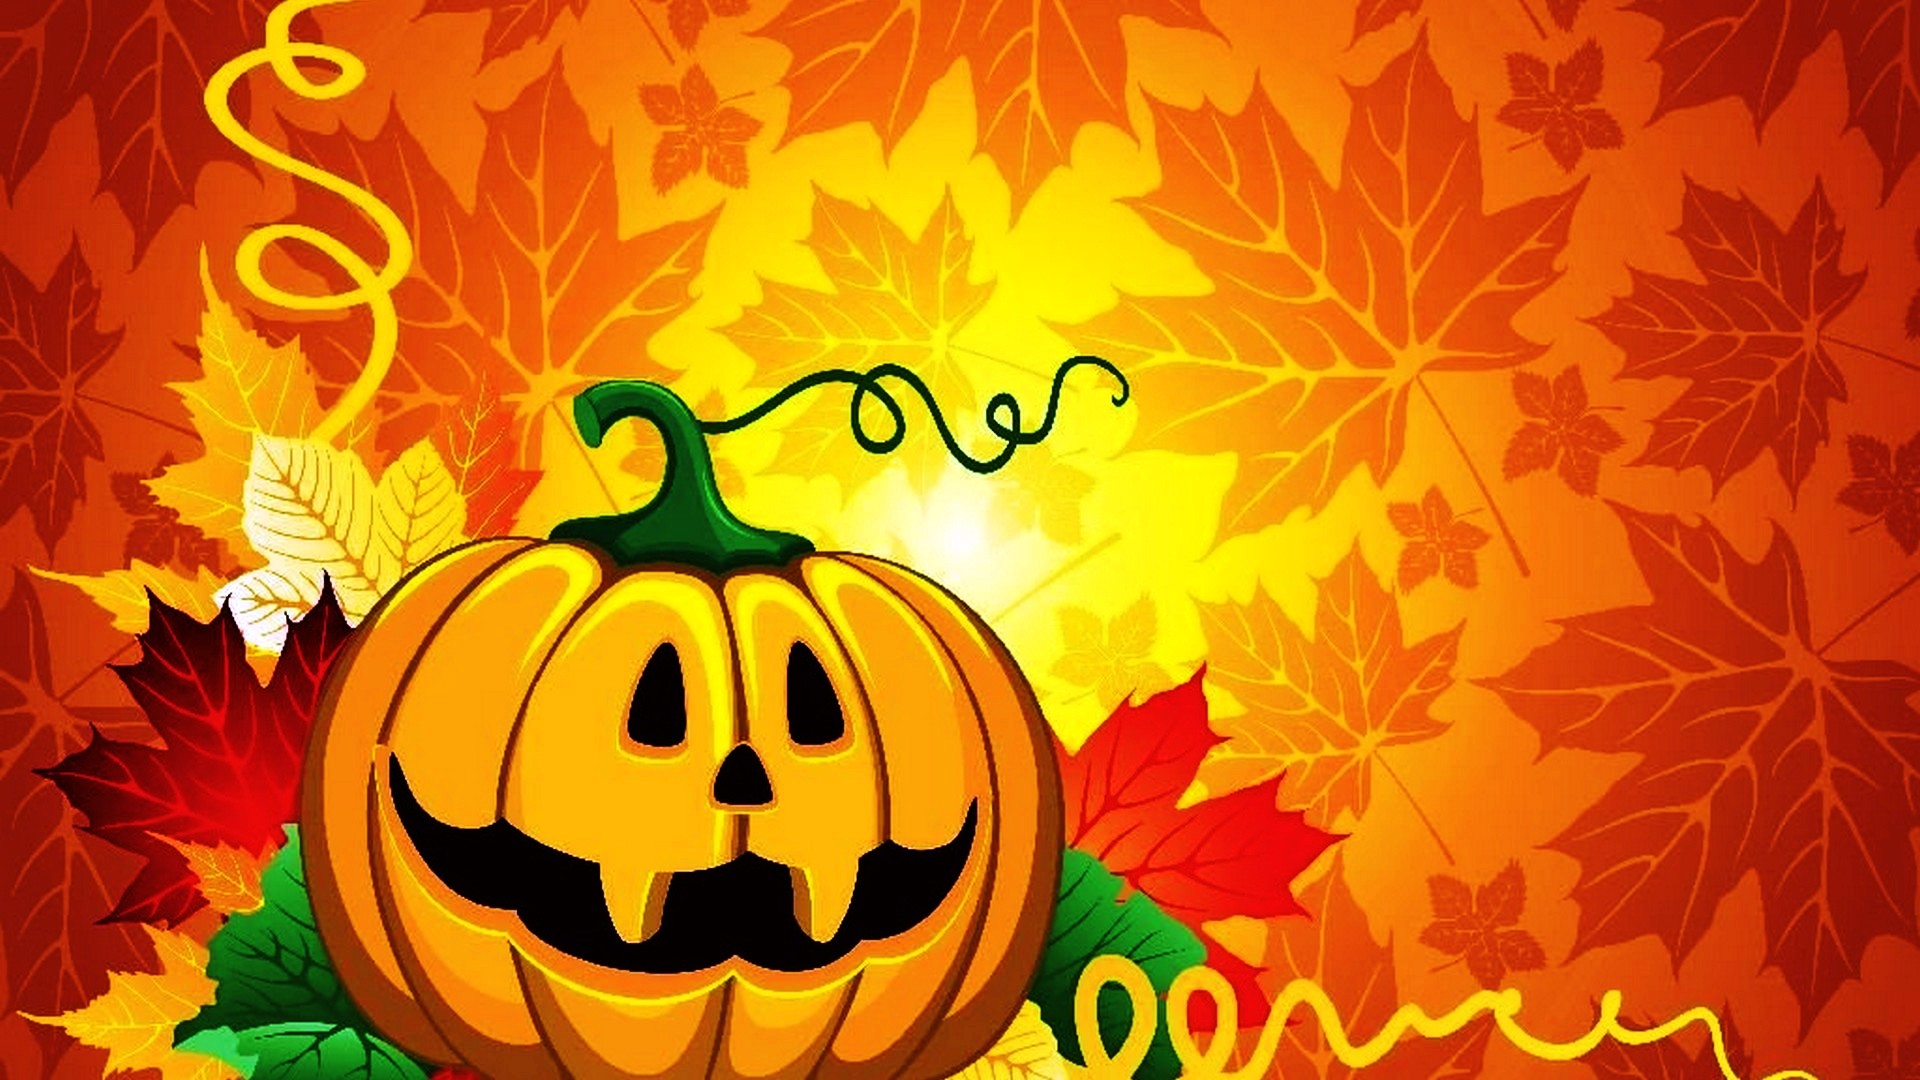 HD Wallpaper Halloween With high-resolution 1920X1080 pixel. You can use this wallpaper for your Desktop Computer Backgrounds, Mac Wallpapers, Android Lock screen or iPhone Screensavers and another smartphone device